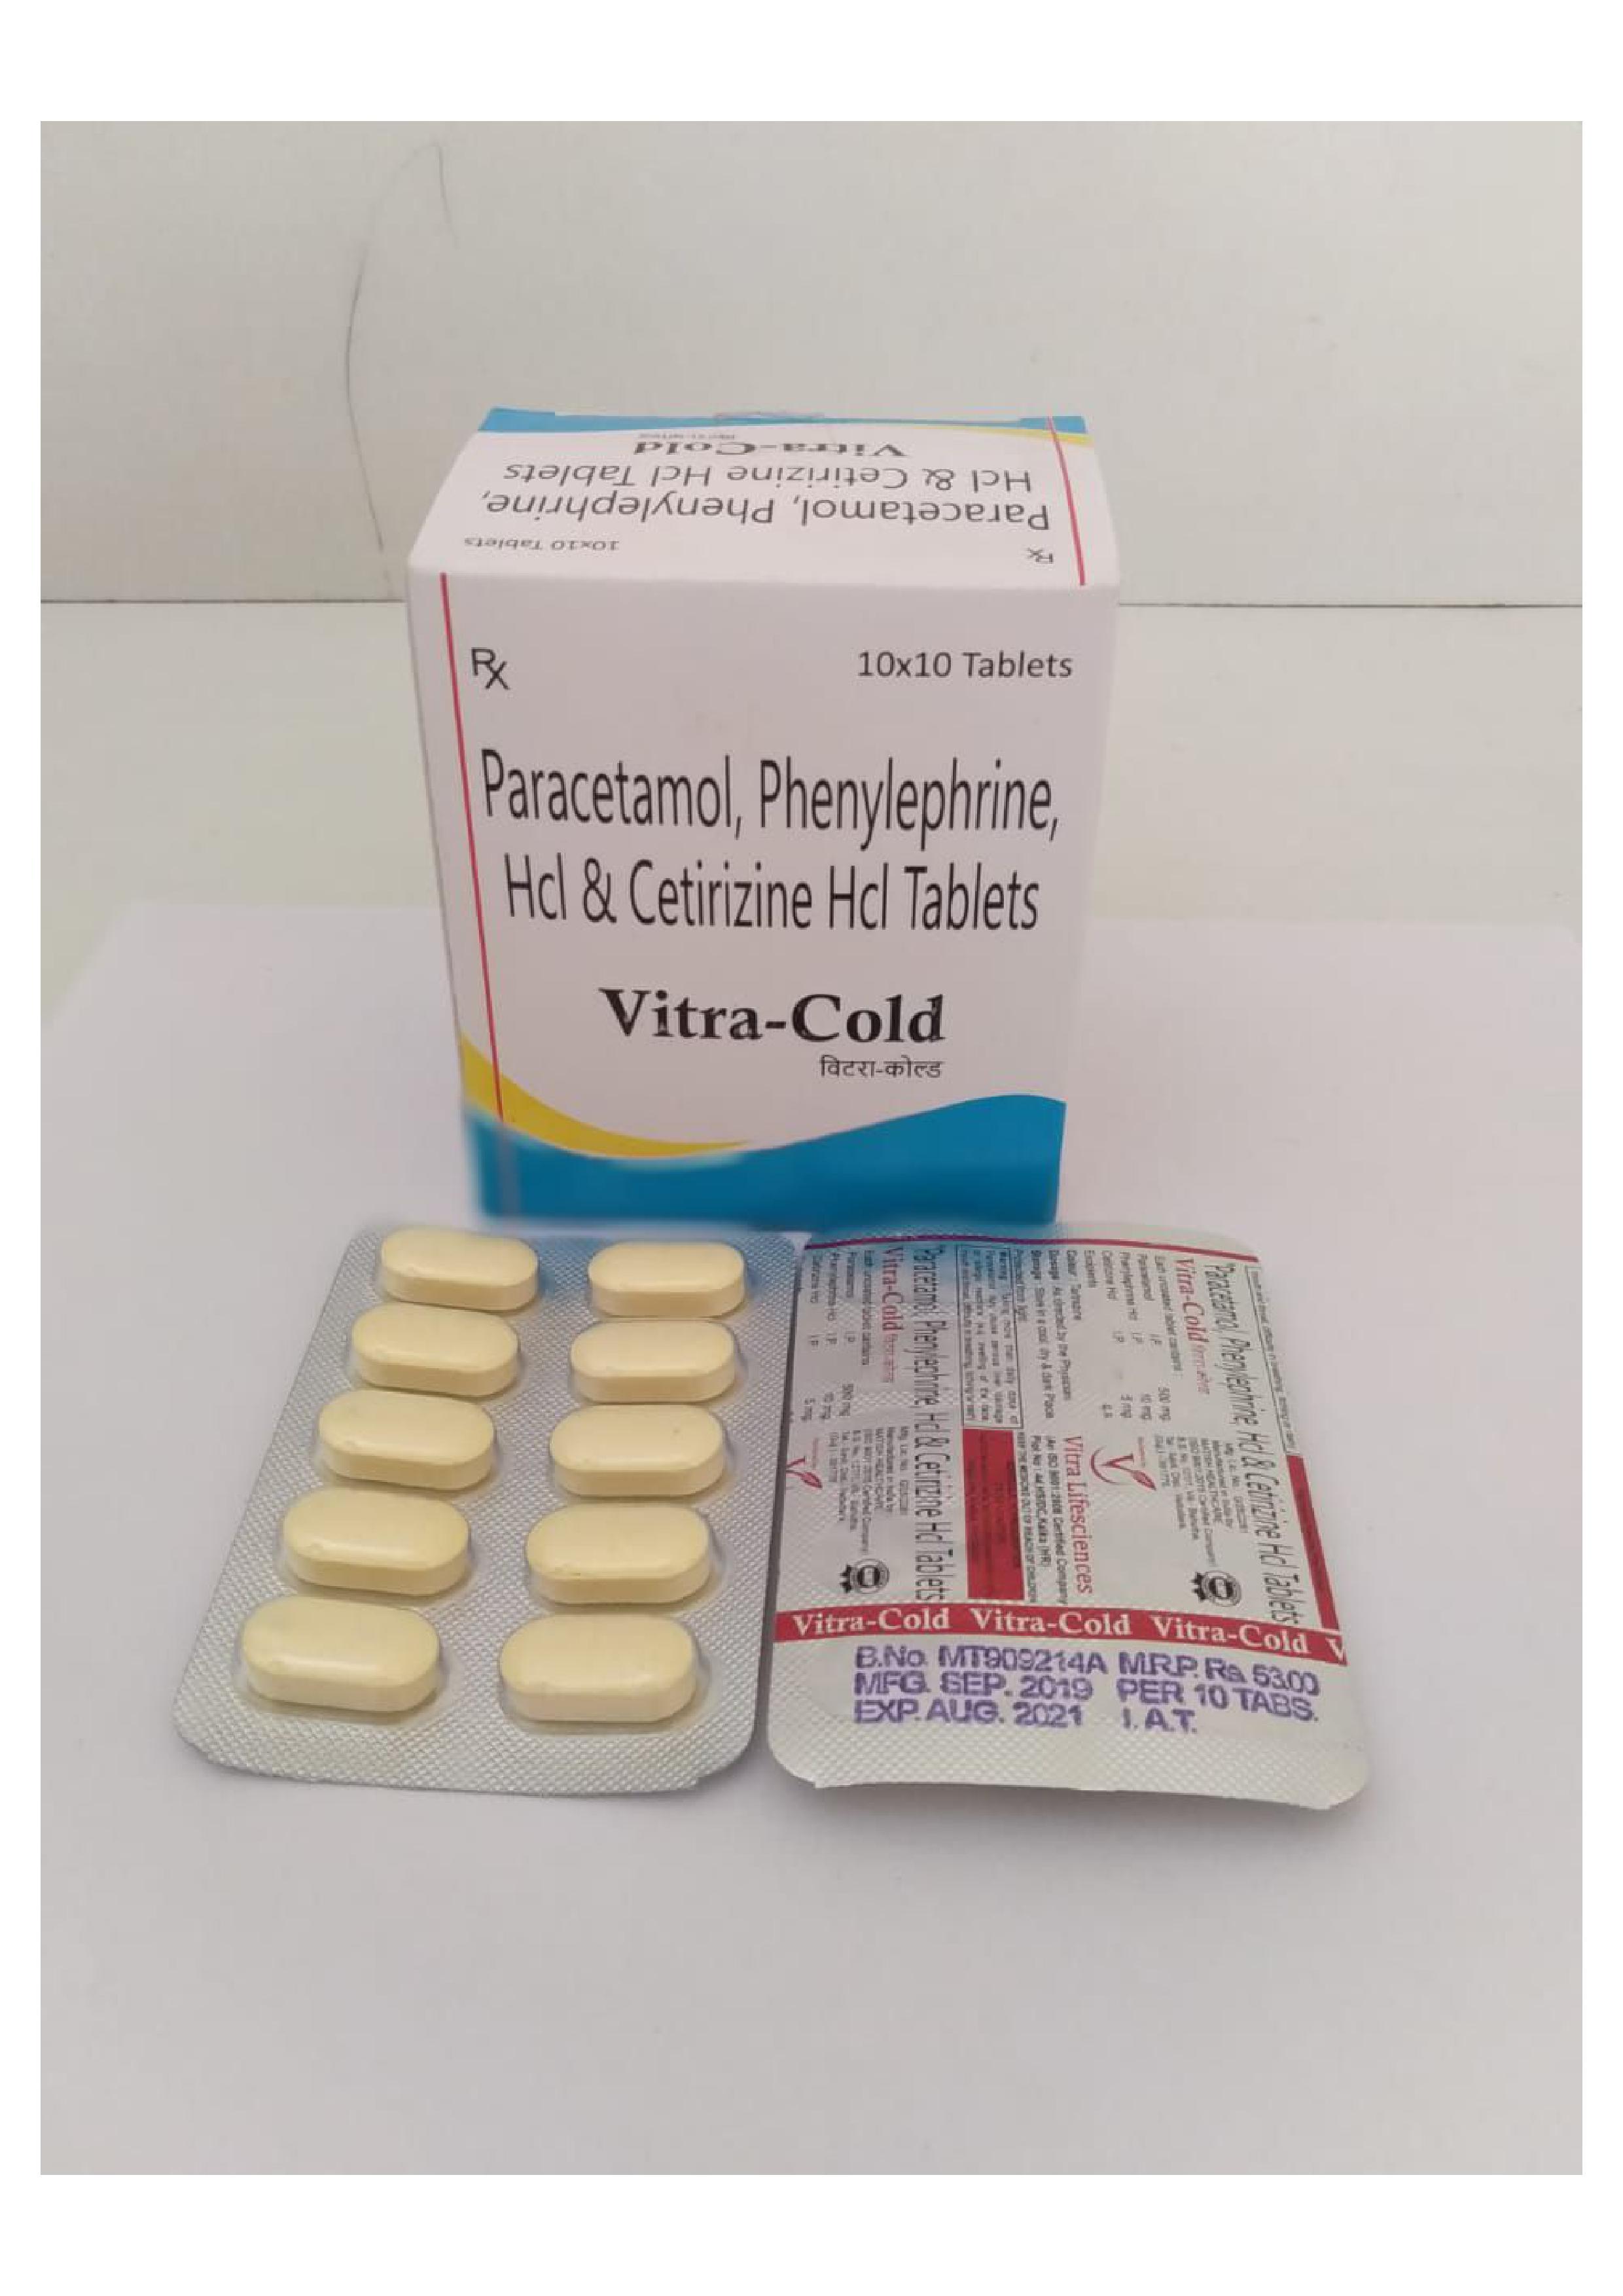 Ceftriaxone Injection in PCD Franchise